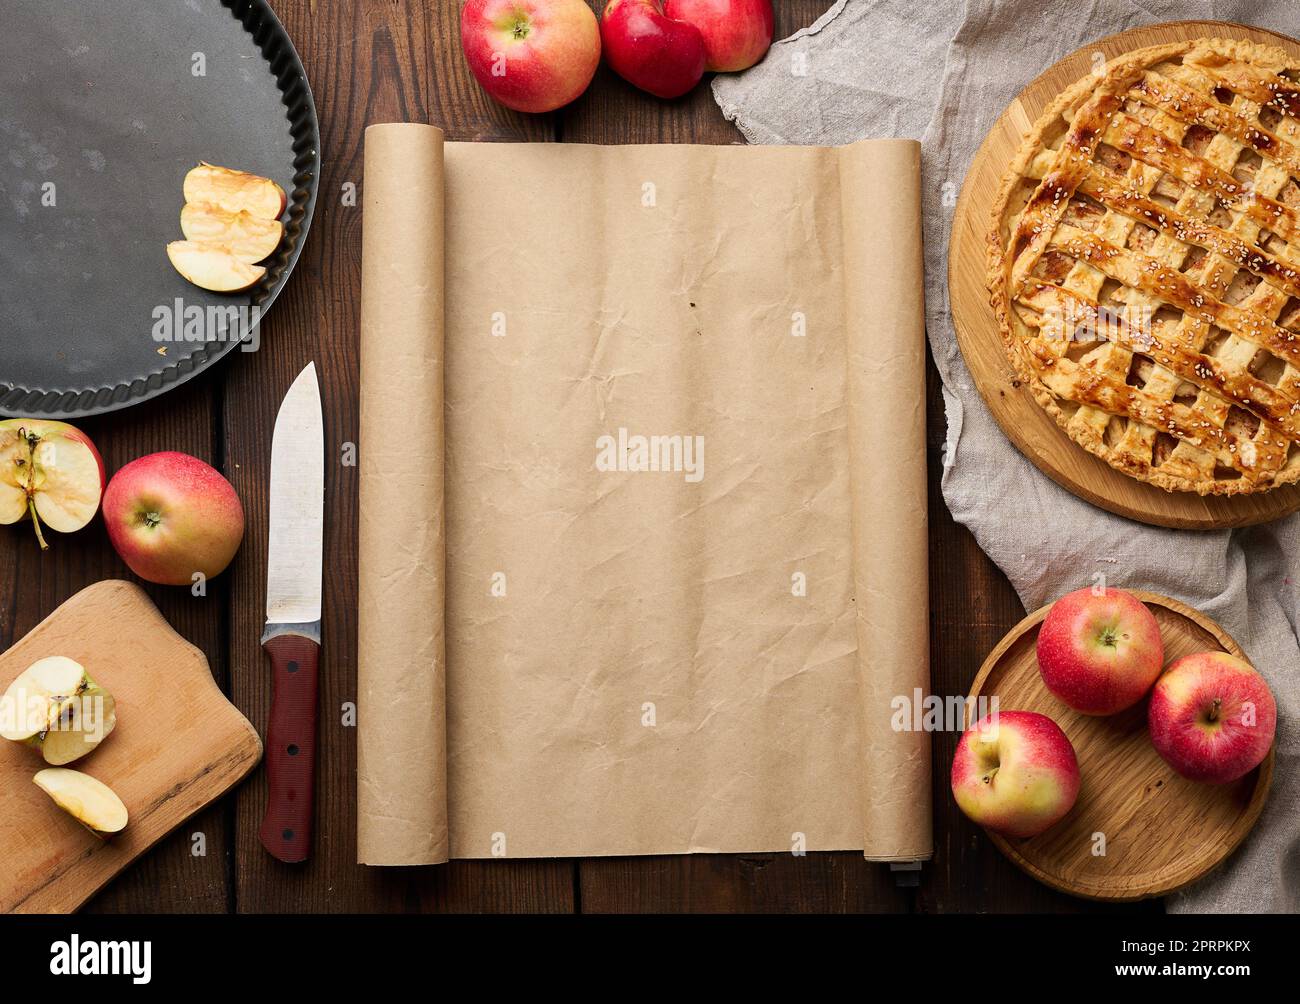 Round baked pie with apple filling on a wooden board and ingredients, brown table. Stock Photo